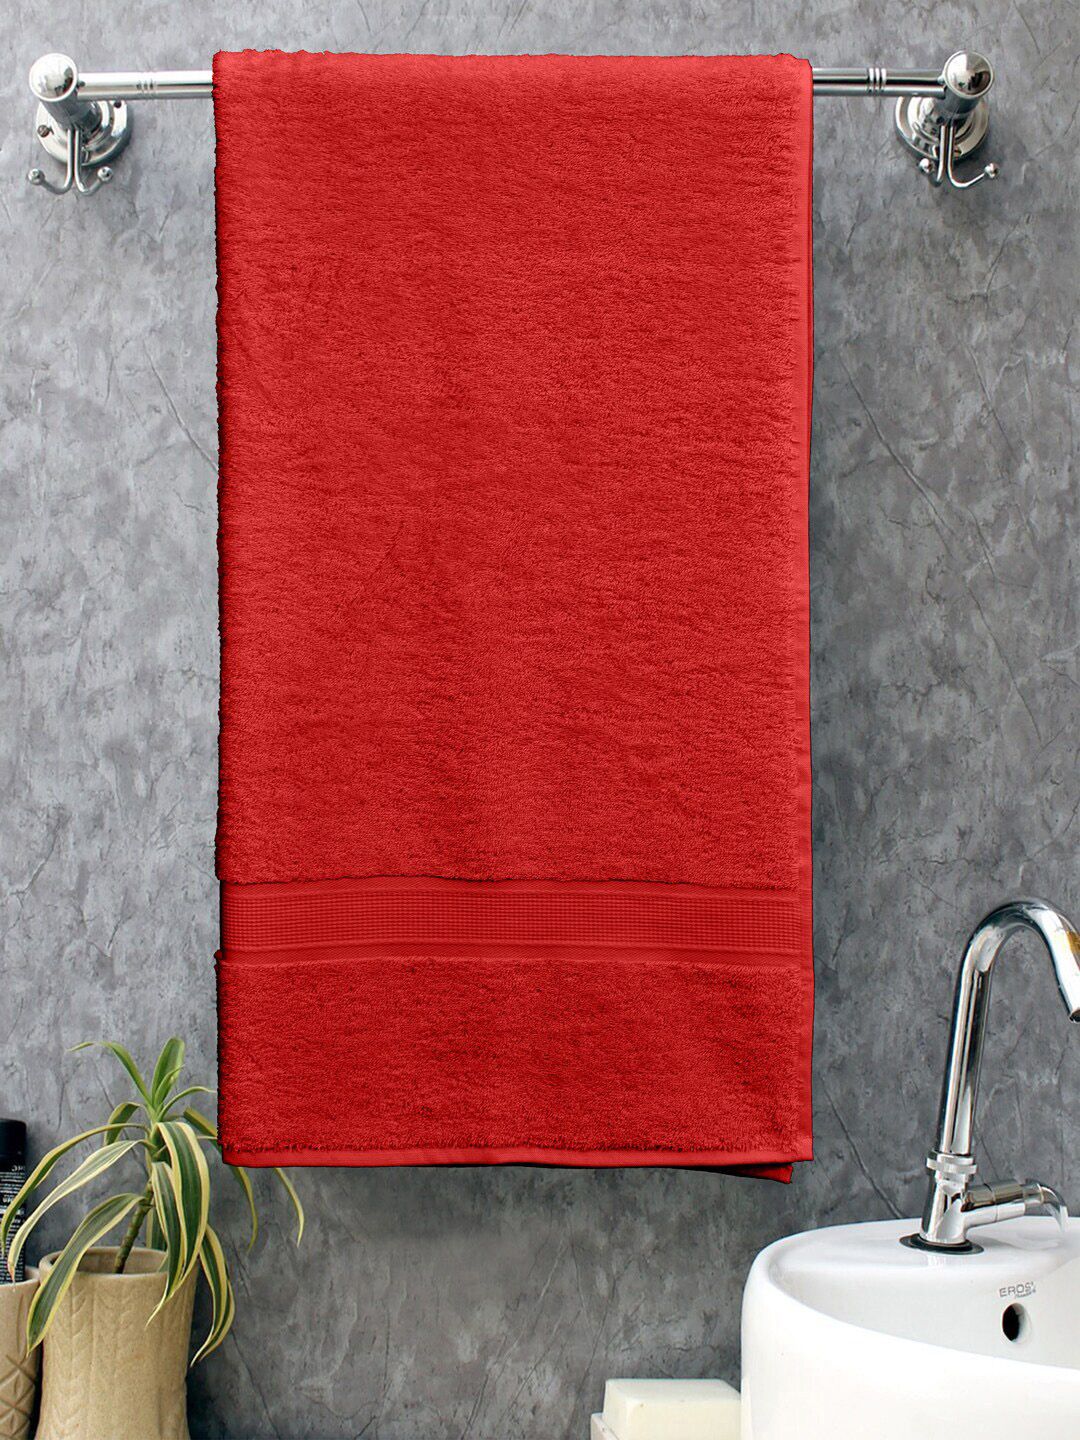 BOMBAY DYEING Red Solid 550 GSM Cotton Bath Towel Price in India